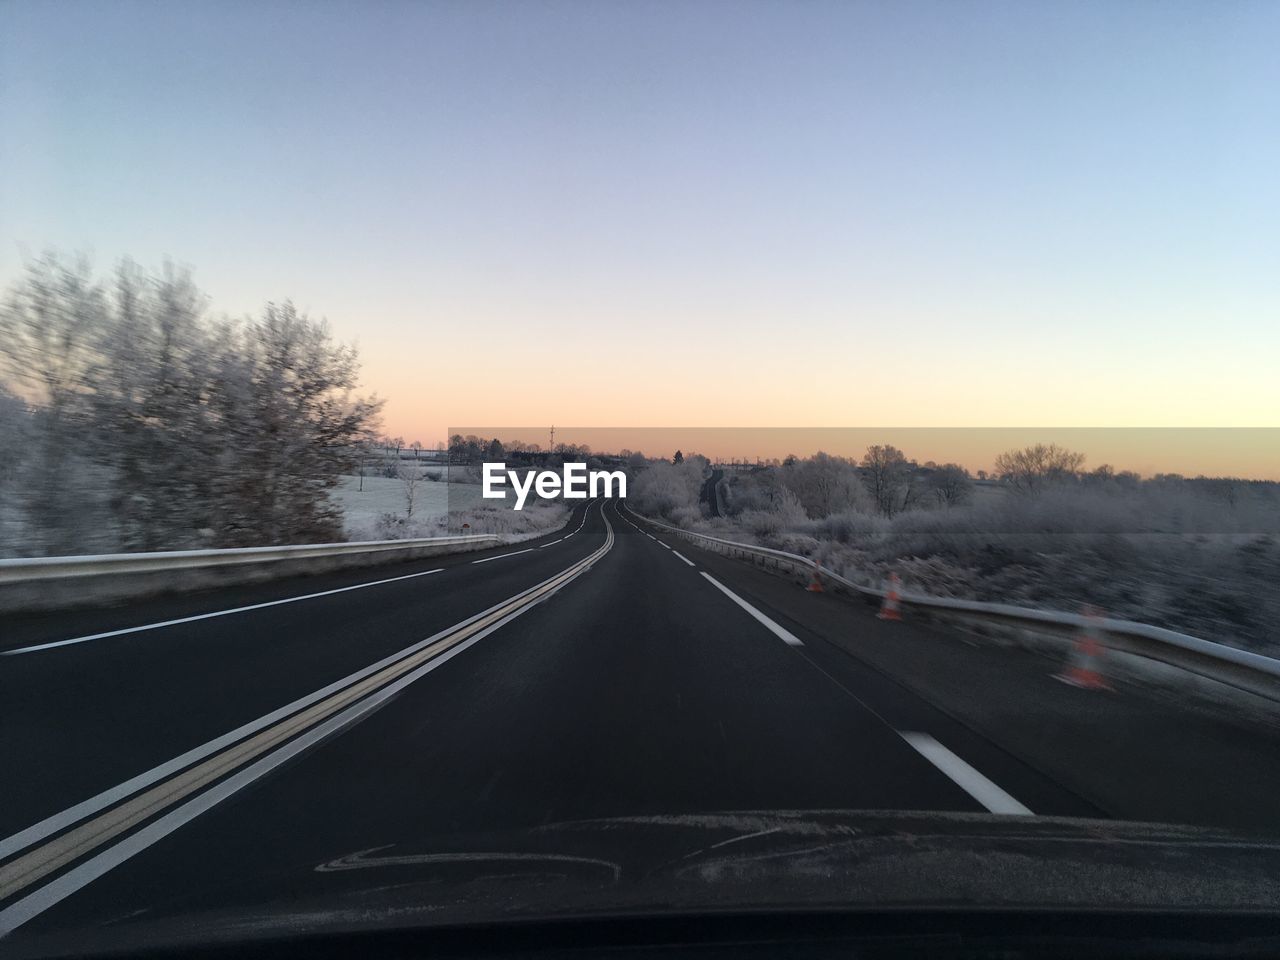 VIEW OF ROAD AGAINST CLEAR SKY DURING WINTER